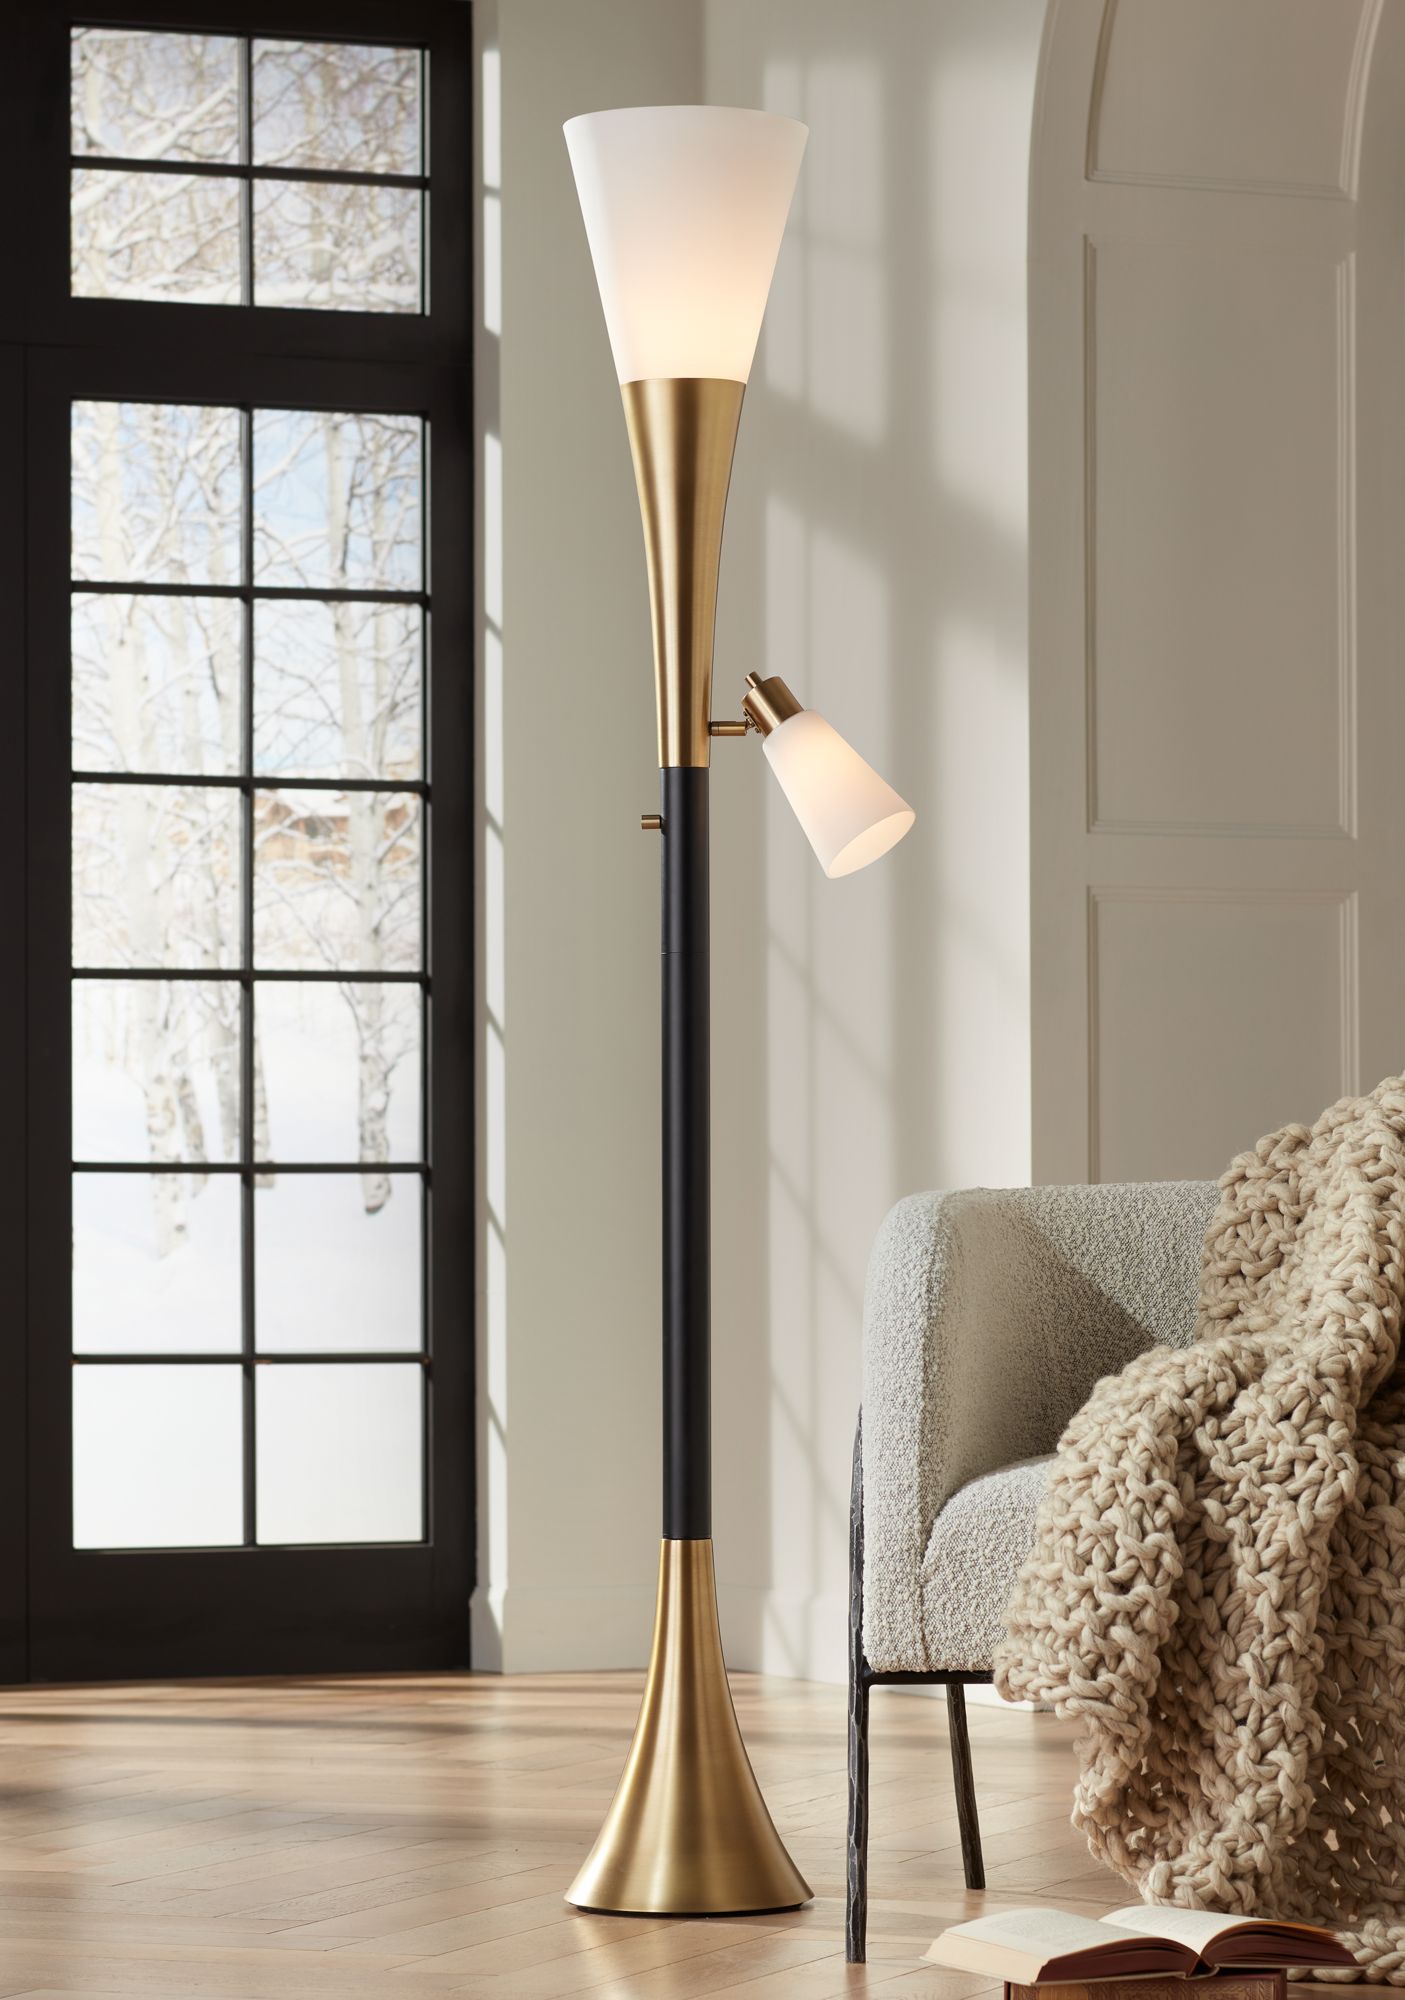 Marville Mission Floor Lamp with End Table Swing Arm Adjustable